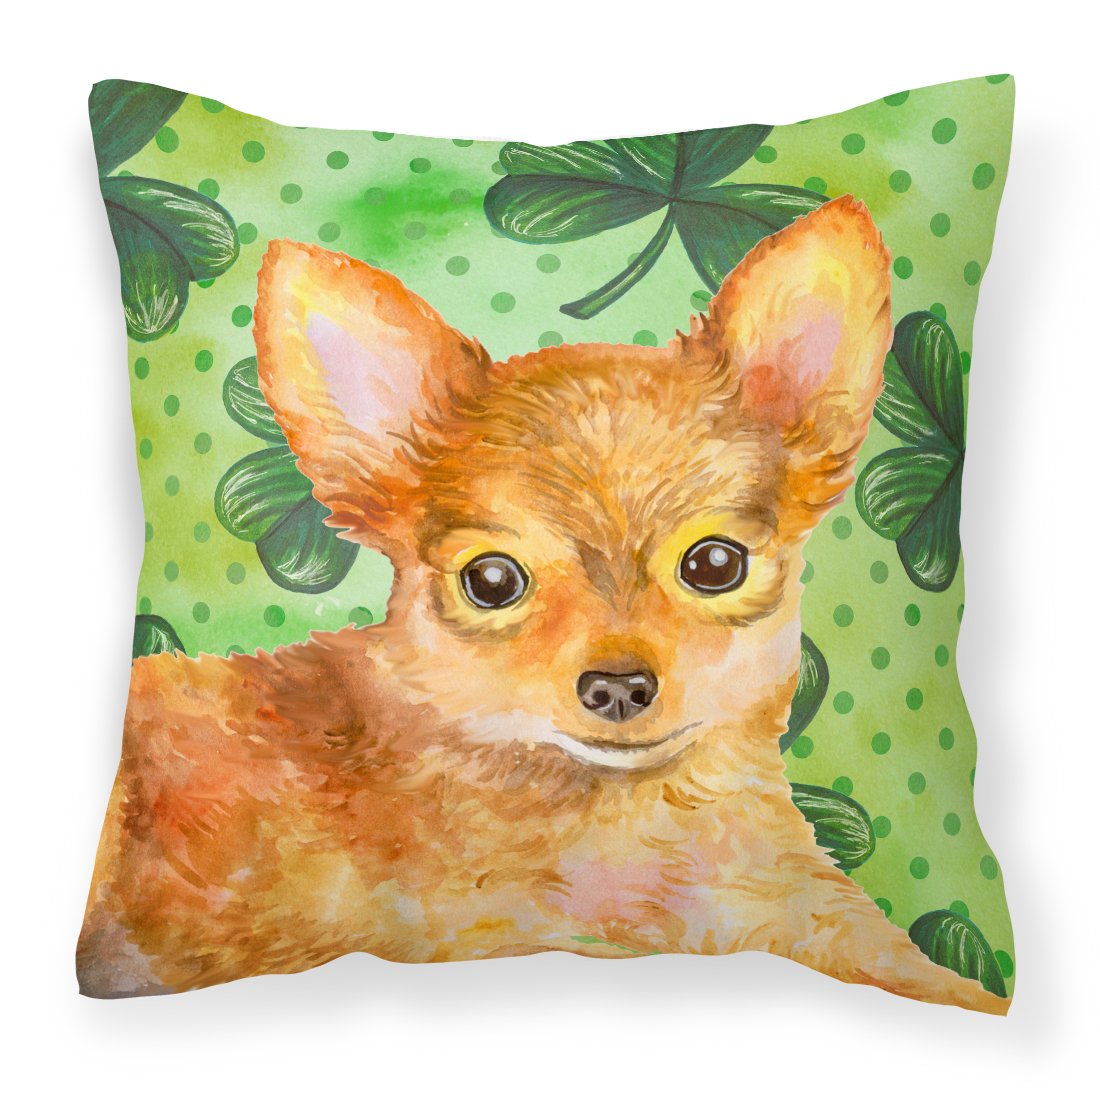 Toy Terrier St Patrick's Fabric Decorative Pillow BB9896PW1818 by Caroline's Treasures